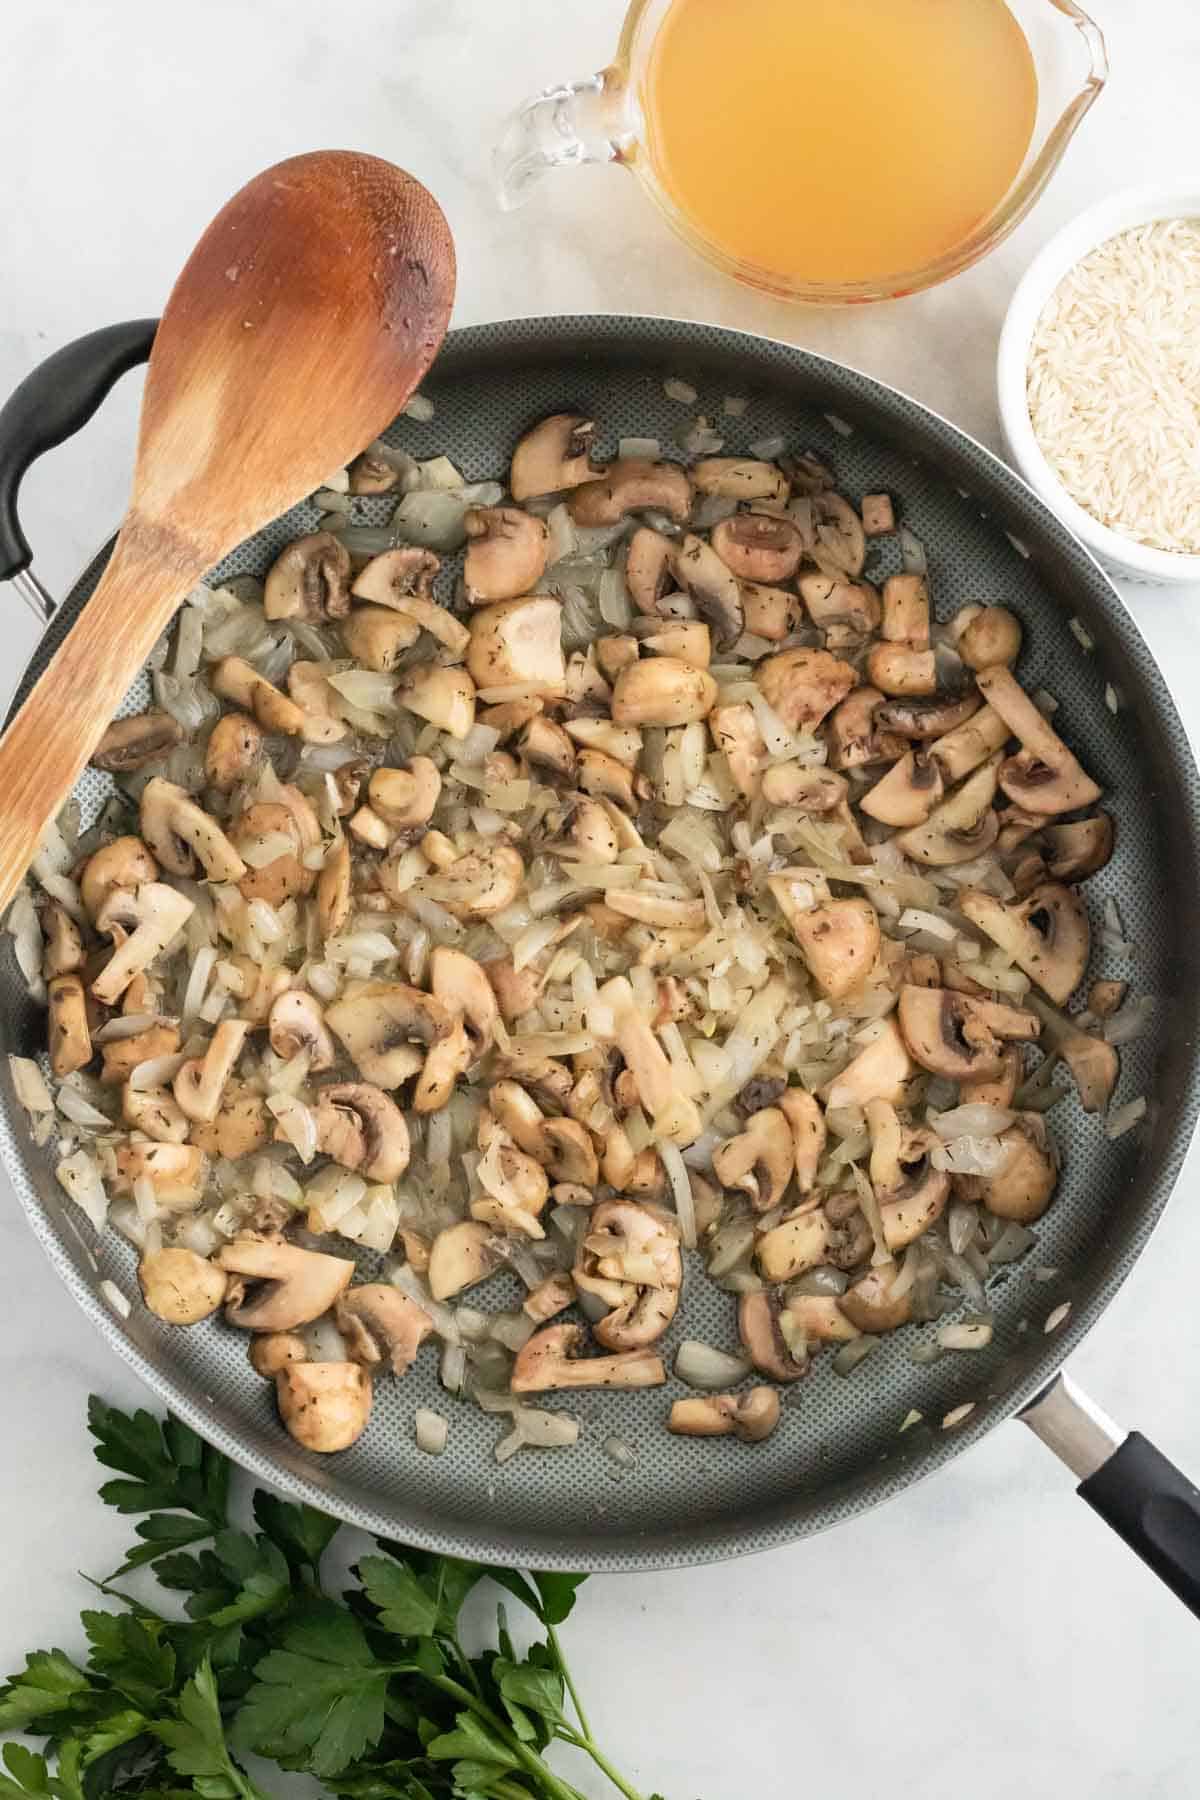 Mushrooms are sautéed in a skillet with onions.